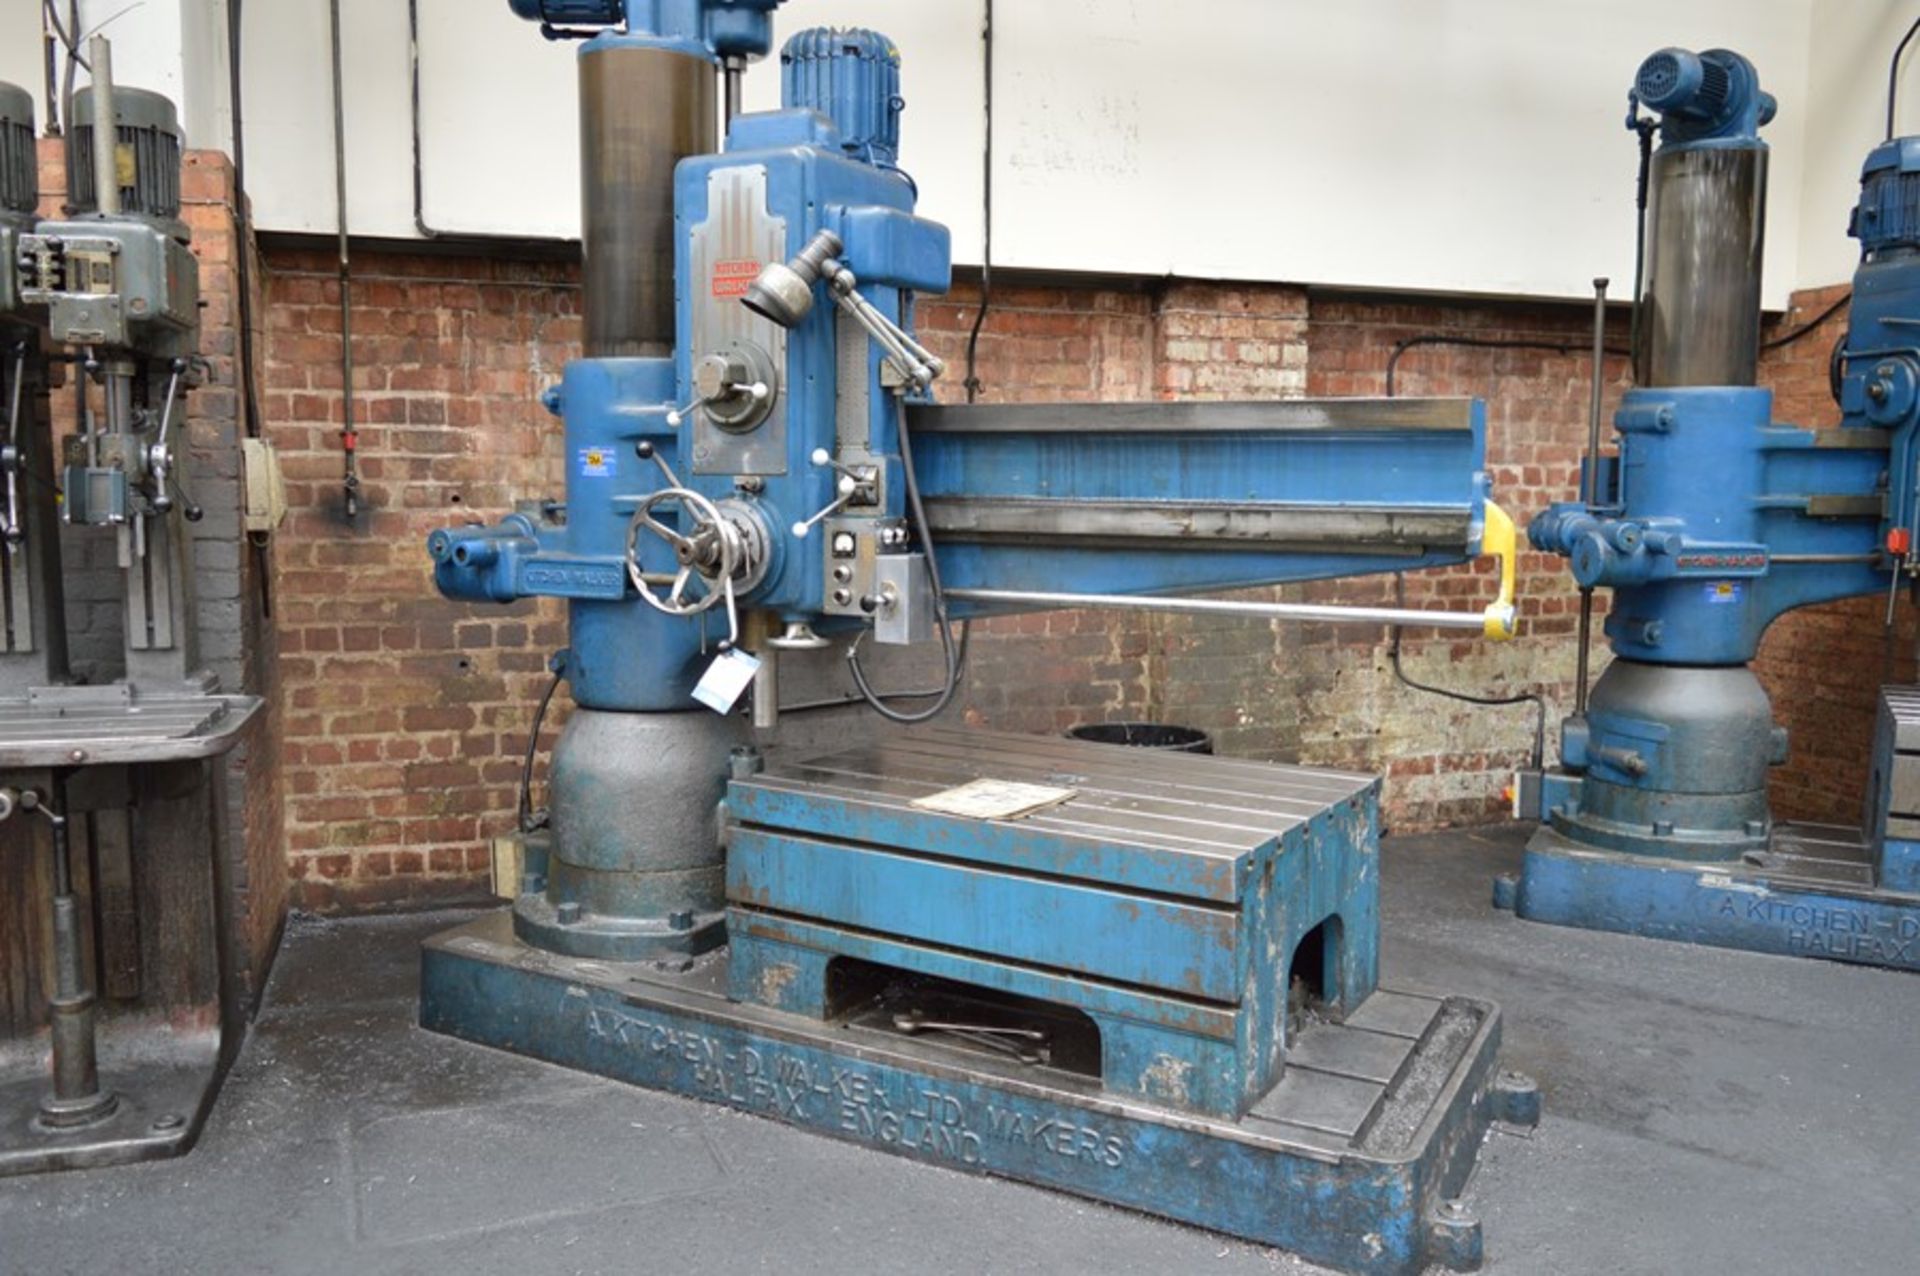 Kitchen & Walker, E3 radial arm drill, Serial No. 2737 (1977) bed size: 1.23m x 0.92m (Risk